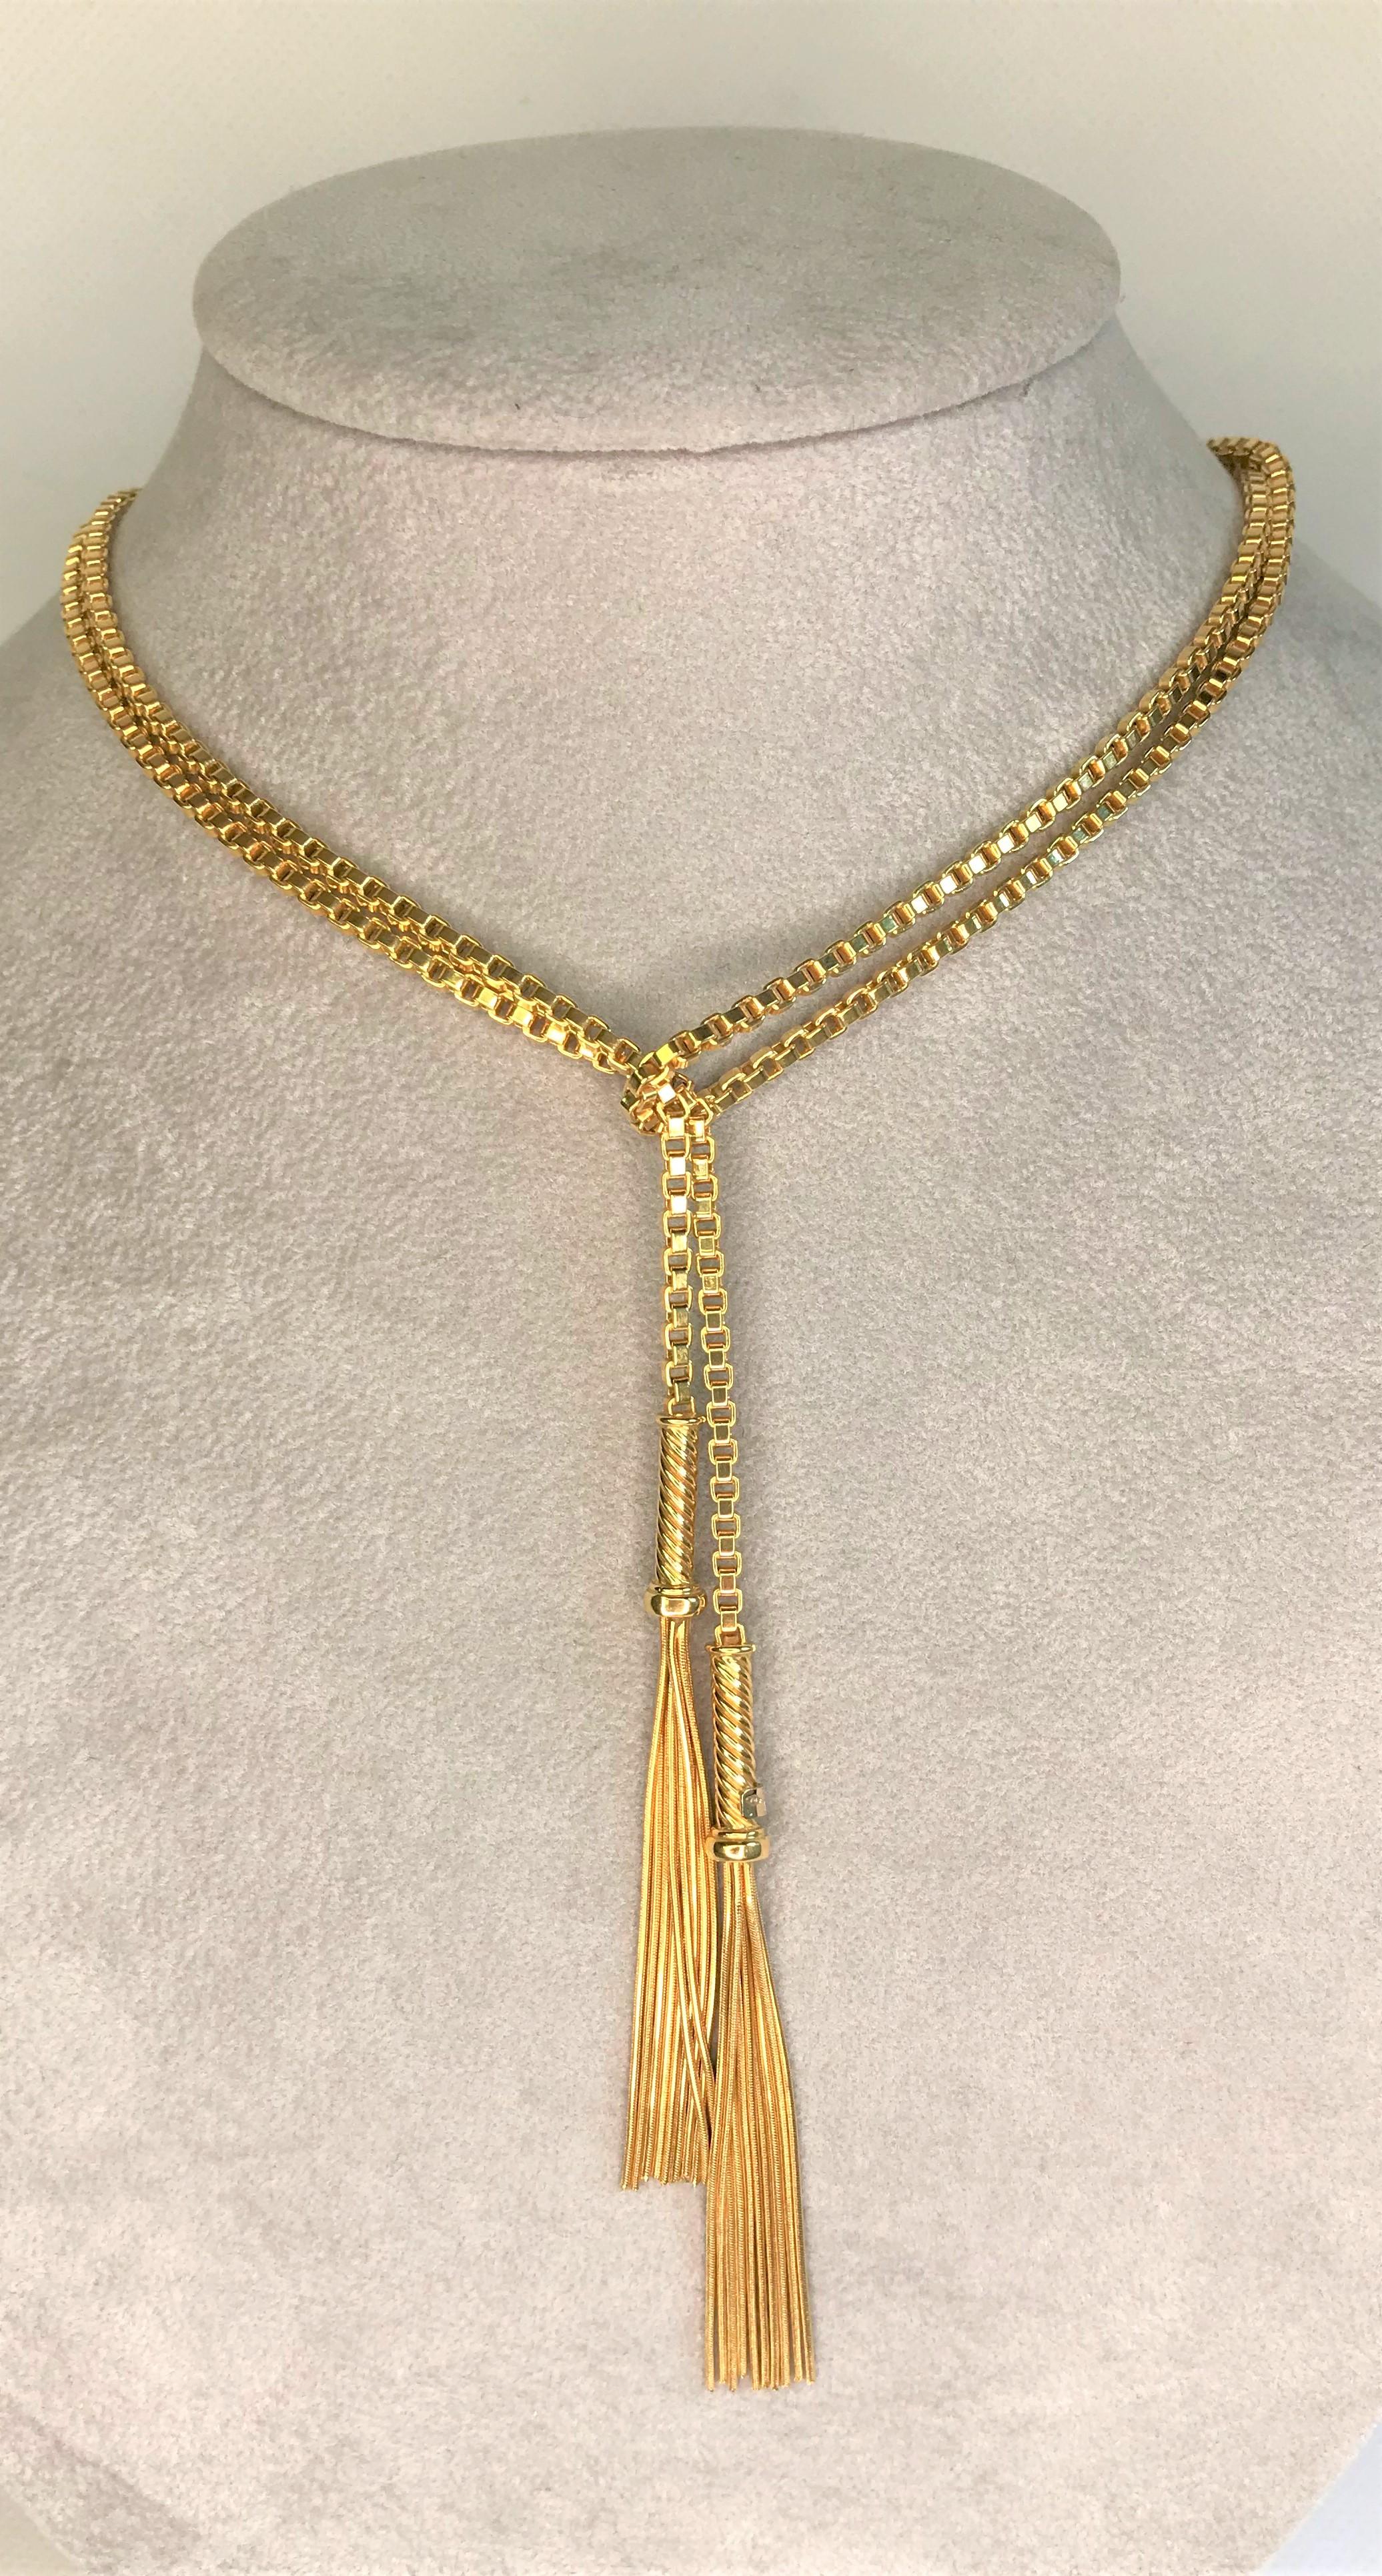 Beautiful, versatile and unique- this is a must have!!
18 karat yellow gold 2.5mm box chain, approximately 48 inches long.  Can be worn long, doubled or even tripled.  It can even be worn as a belt!
Tassel with decorative connector on each end.
18